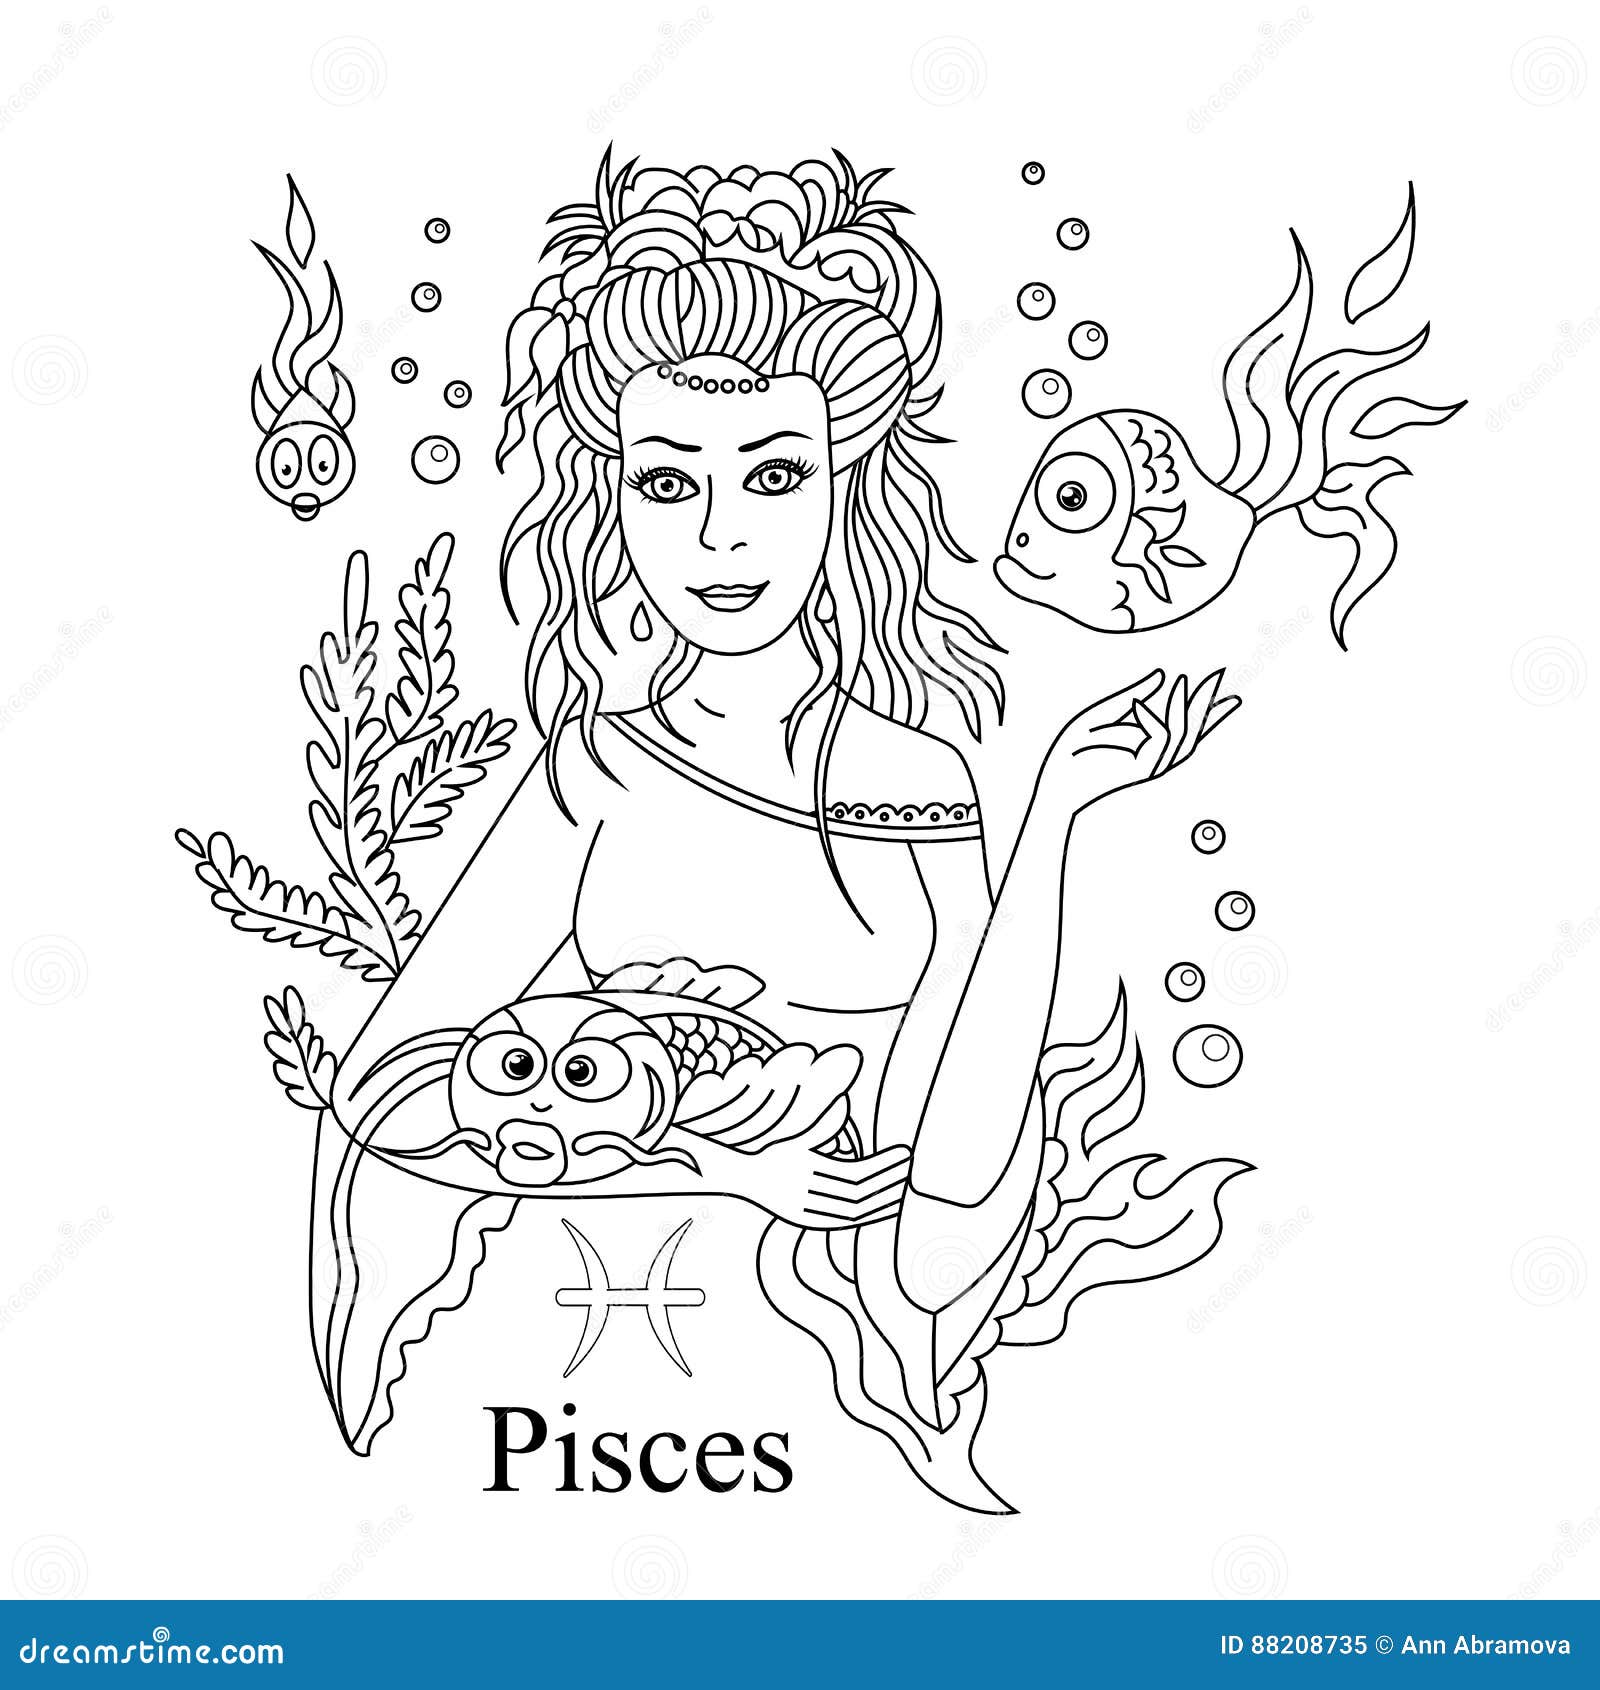 Download Pisces Zodiac Sign As A Beautiful Girl Coloring Page. Vector Ill Stock Vector - Illustration of ...